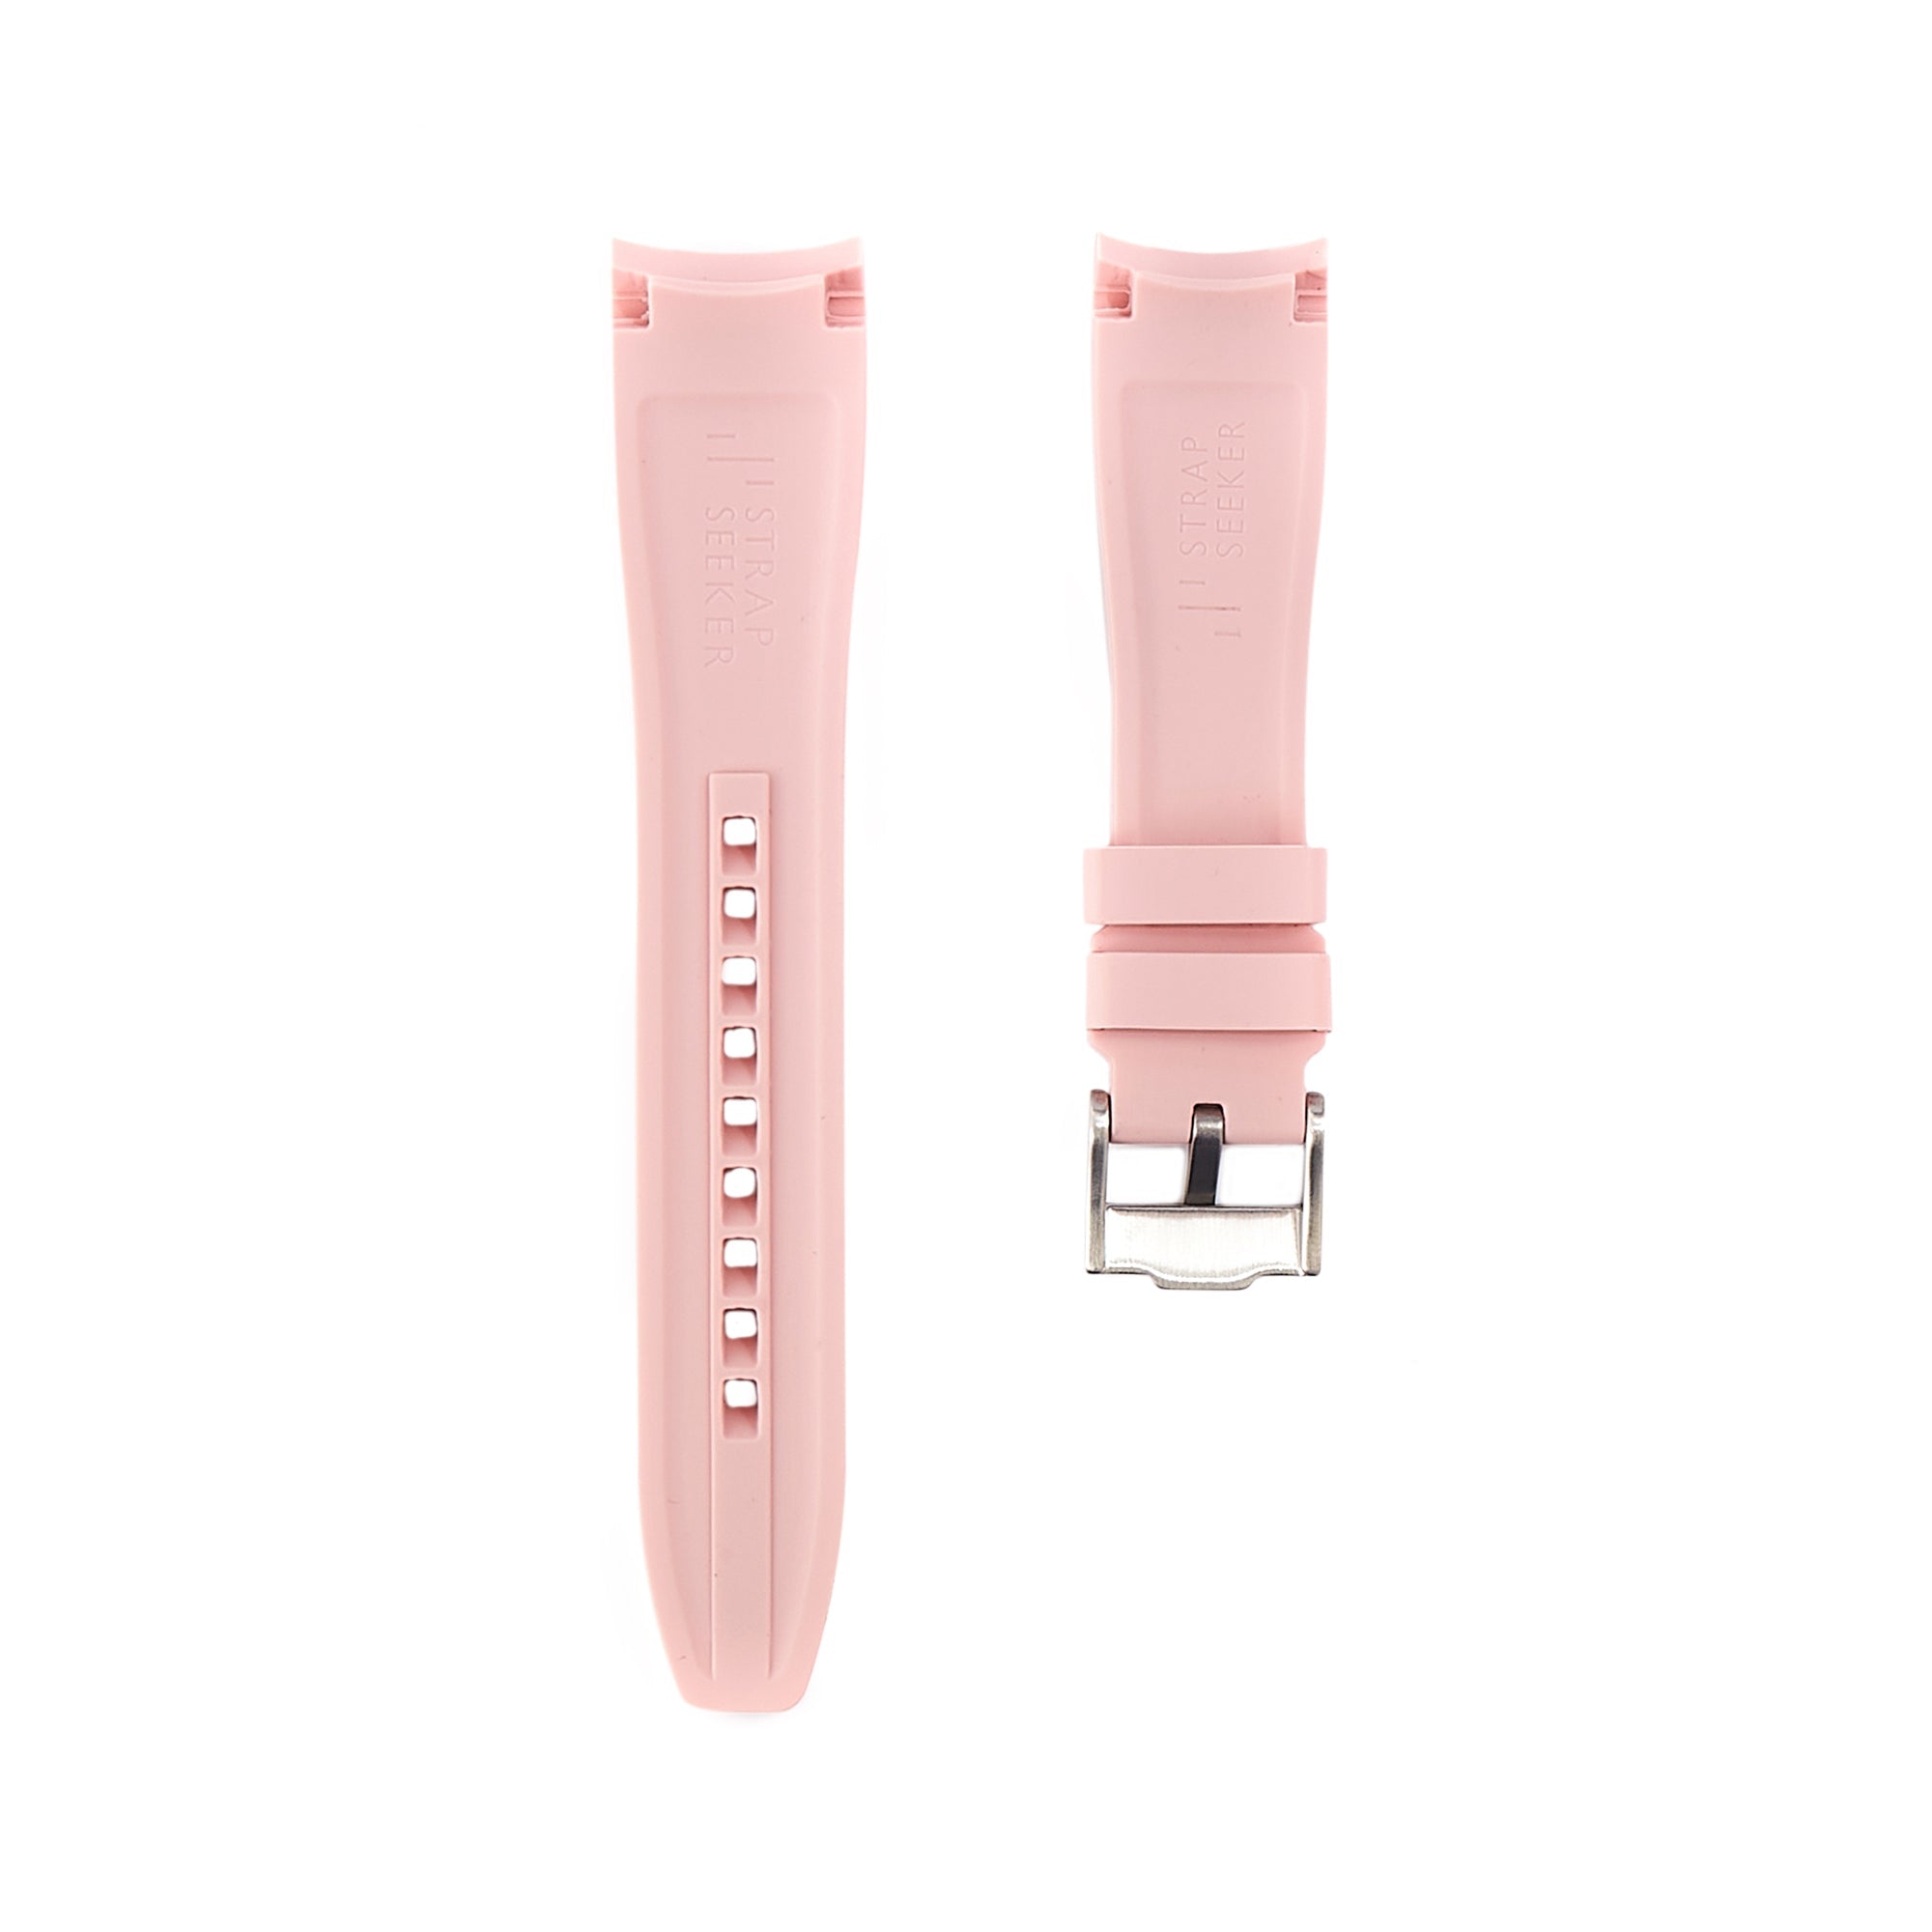 Curved End Soft Silicone Strap - Compatible with Seiko SRPD – Light Pink (2418) -StrapSeeker